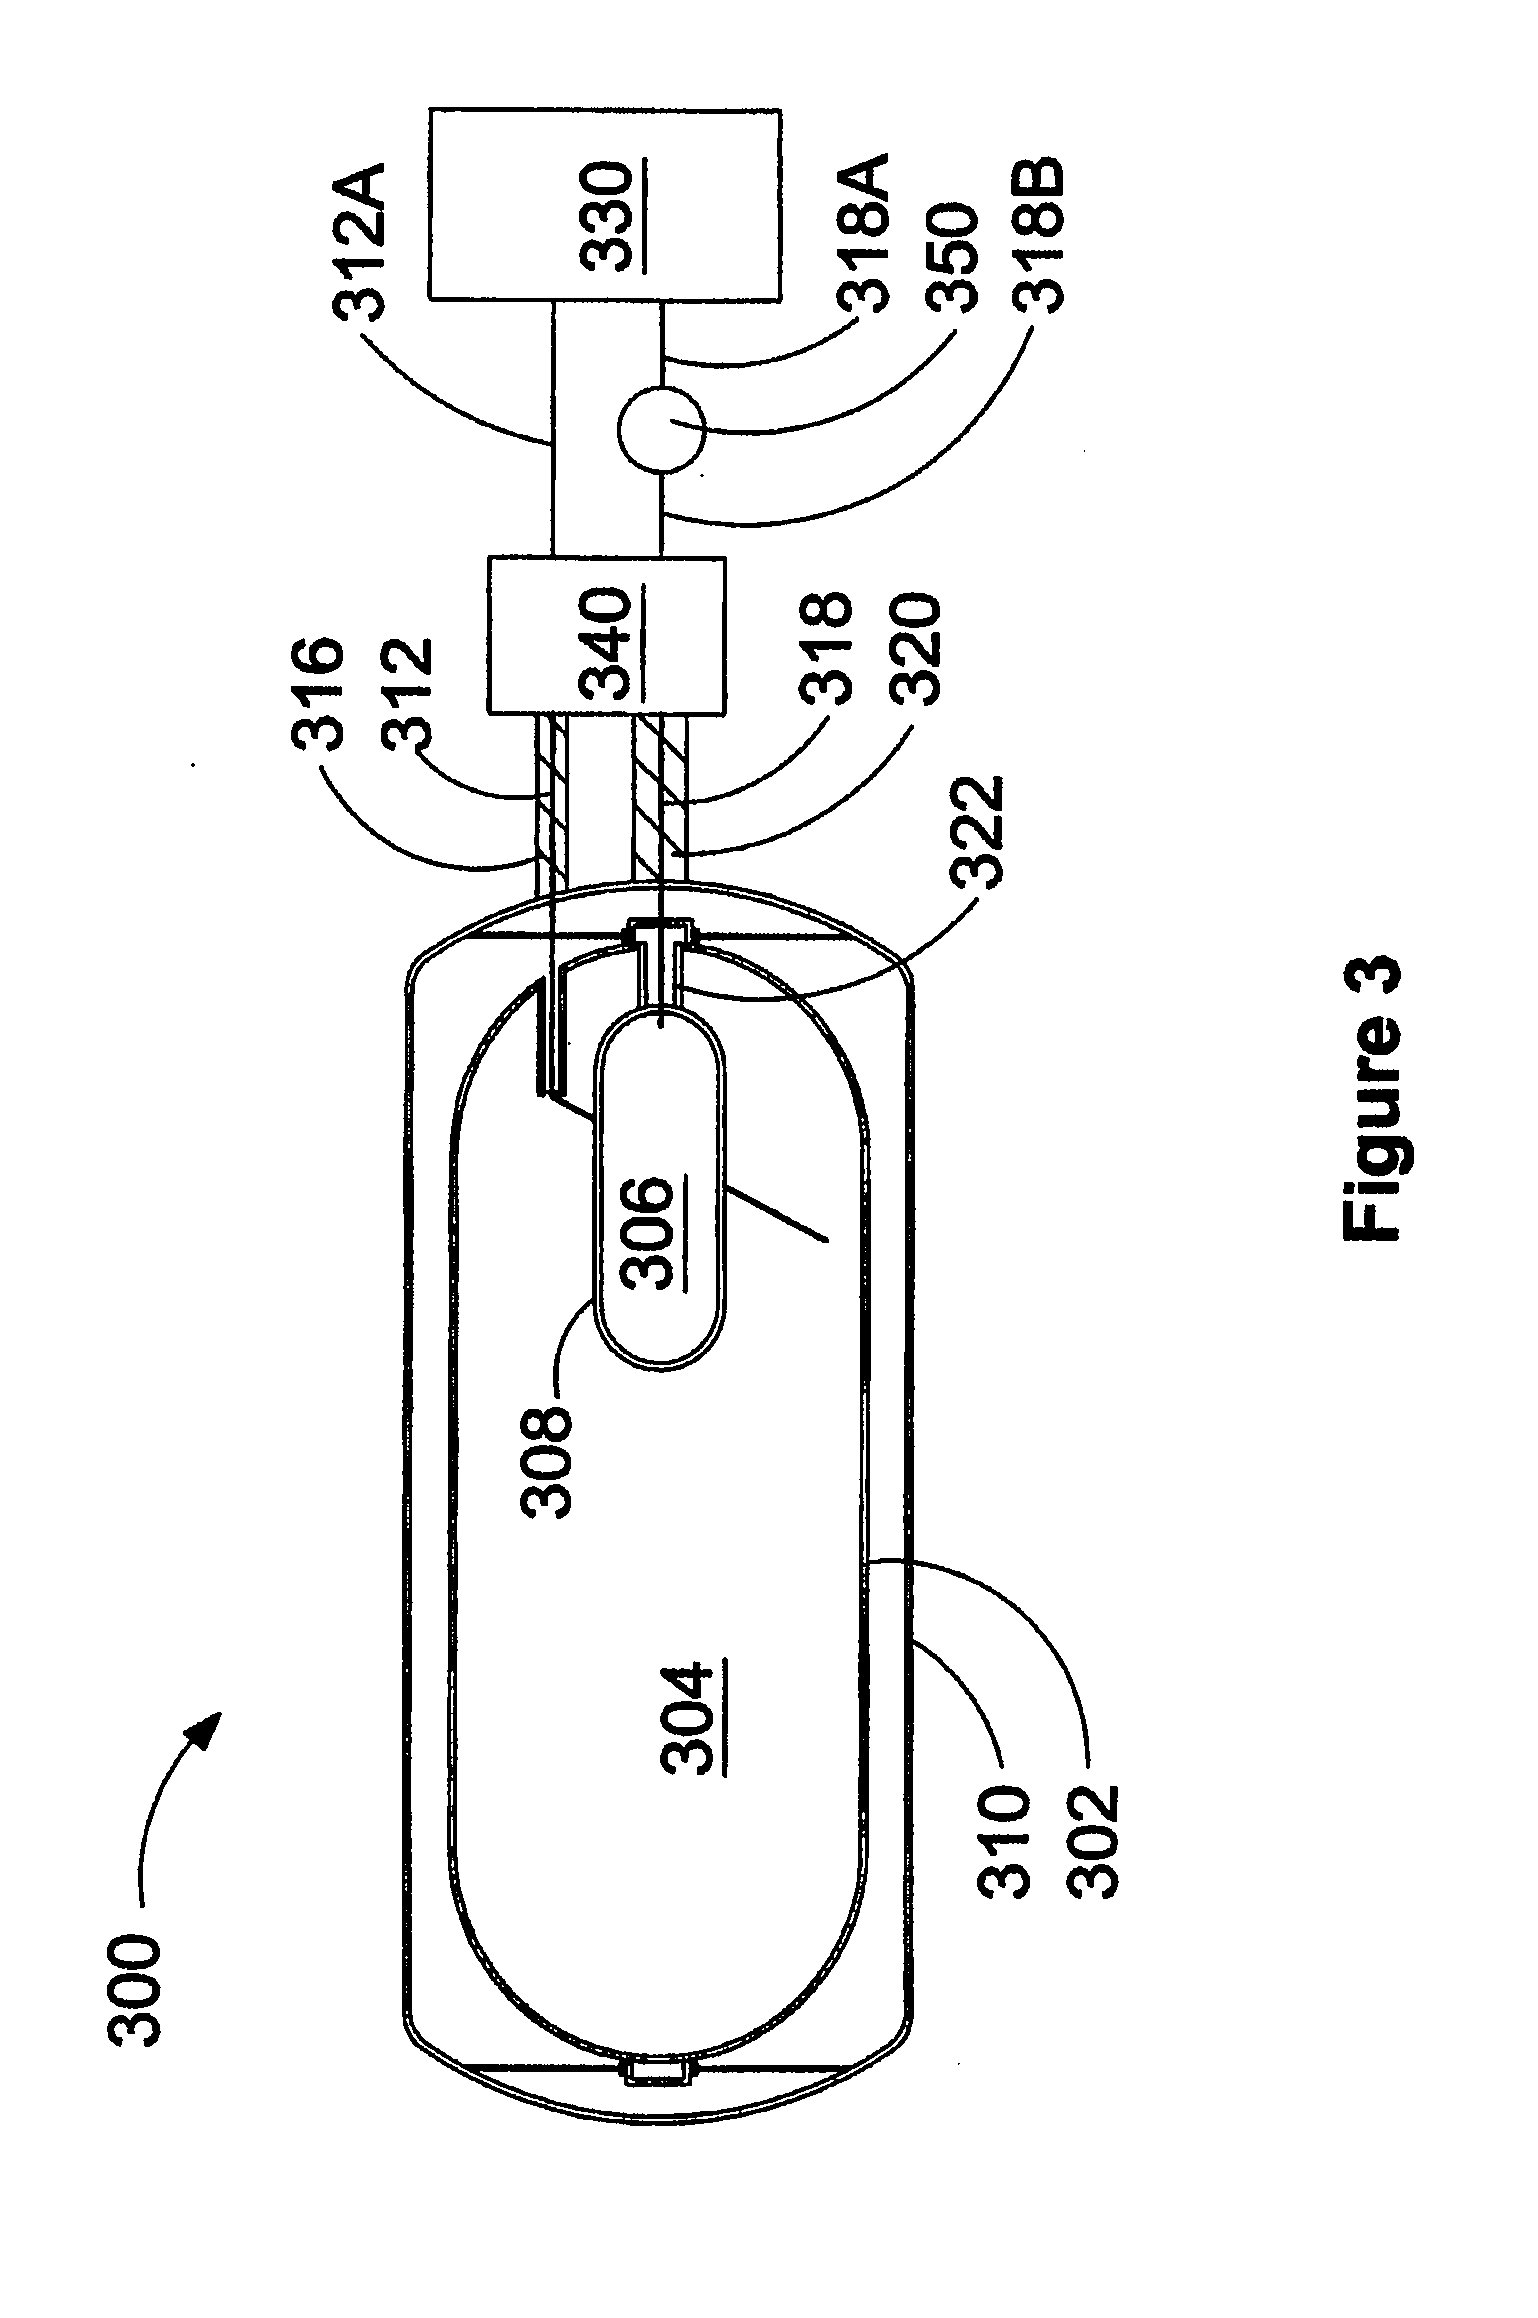 Multi-Fuel Storage System And Method Of Storing Fuel In A Multi-Fuel Storage System